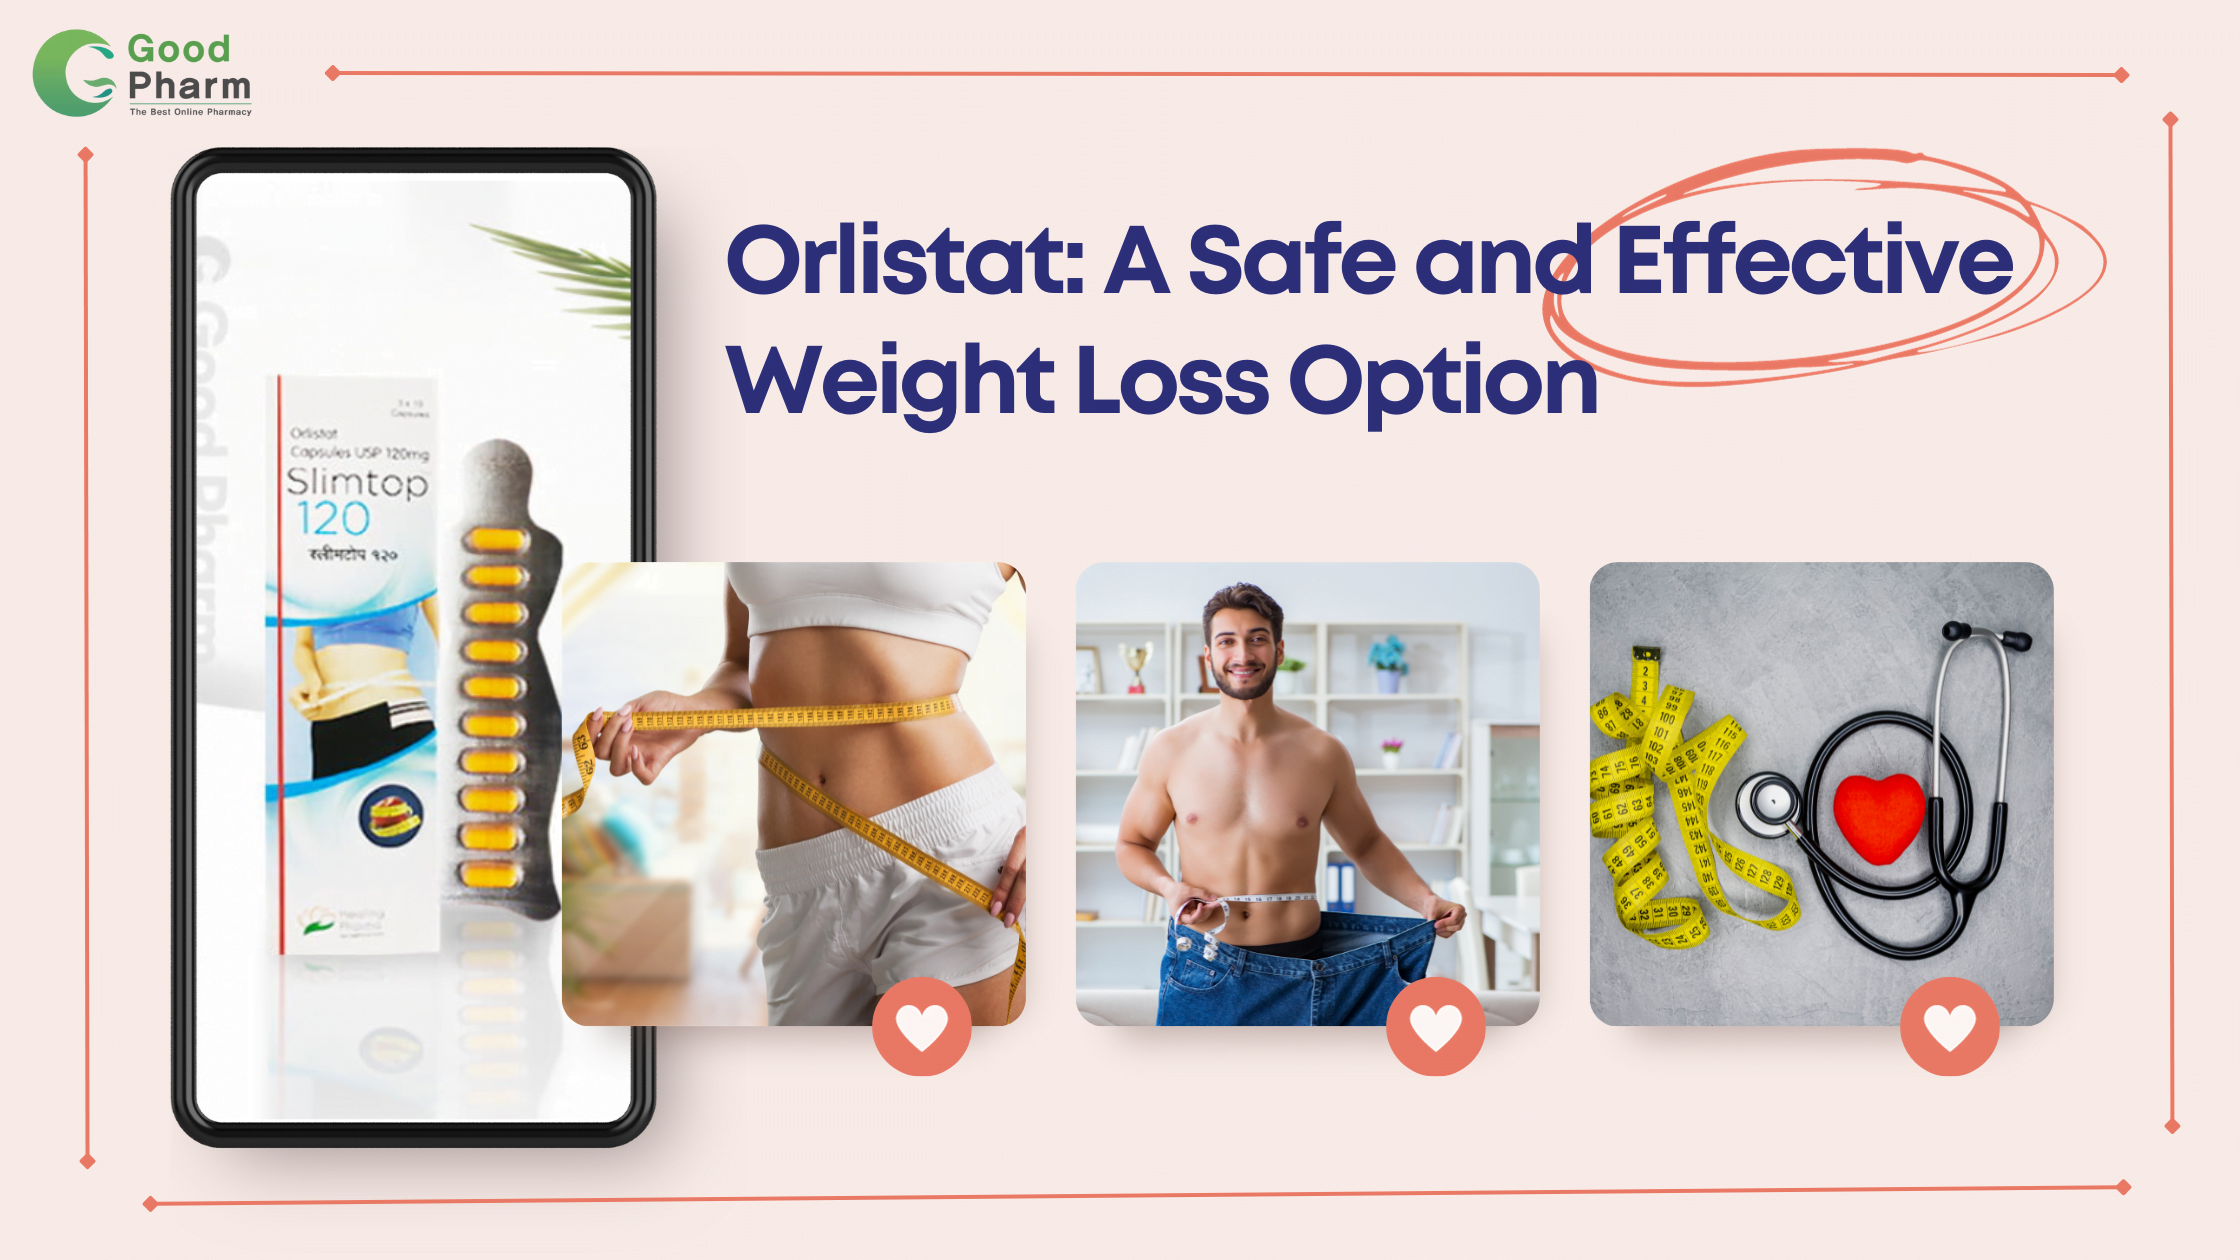 Orlistat: A Safe and Effective Weight Loss Option